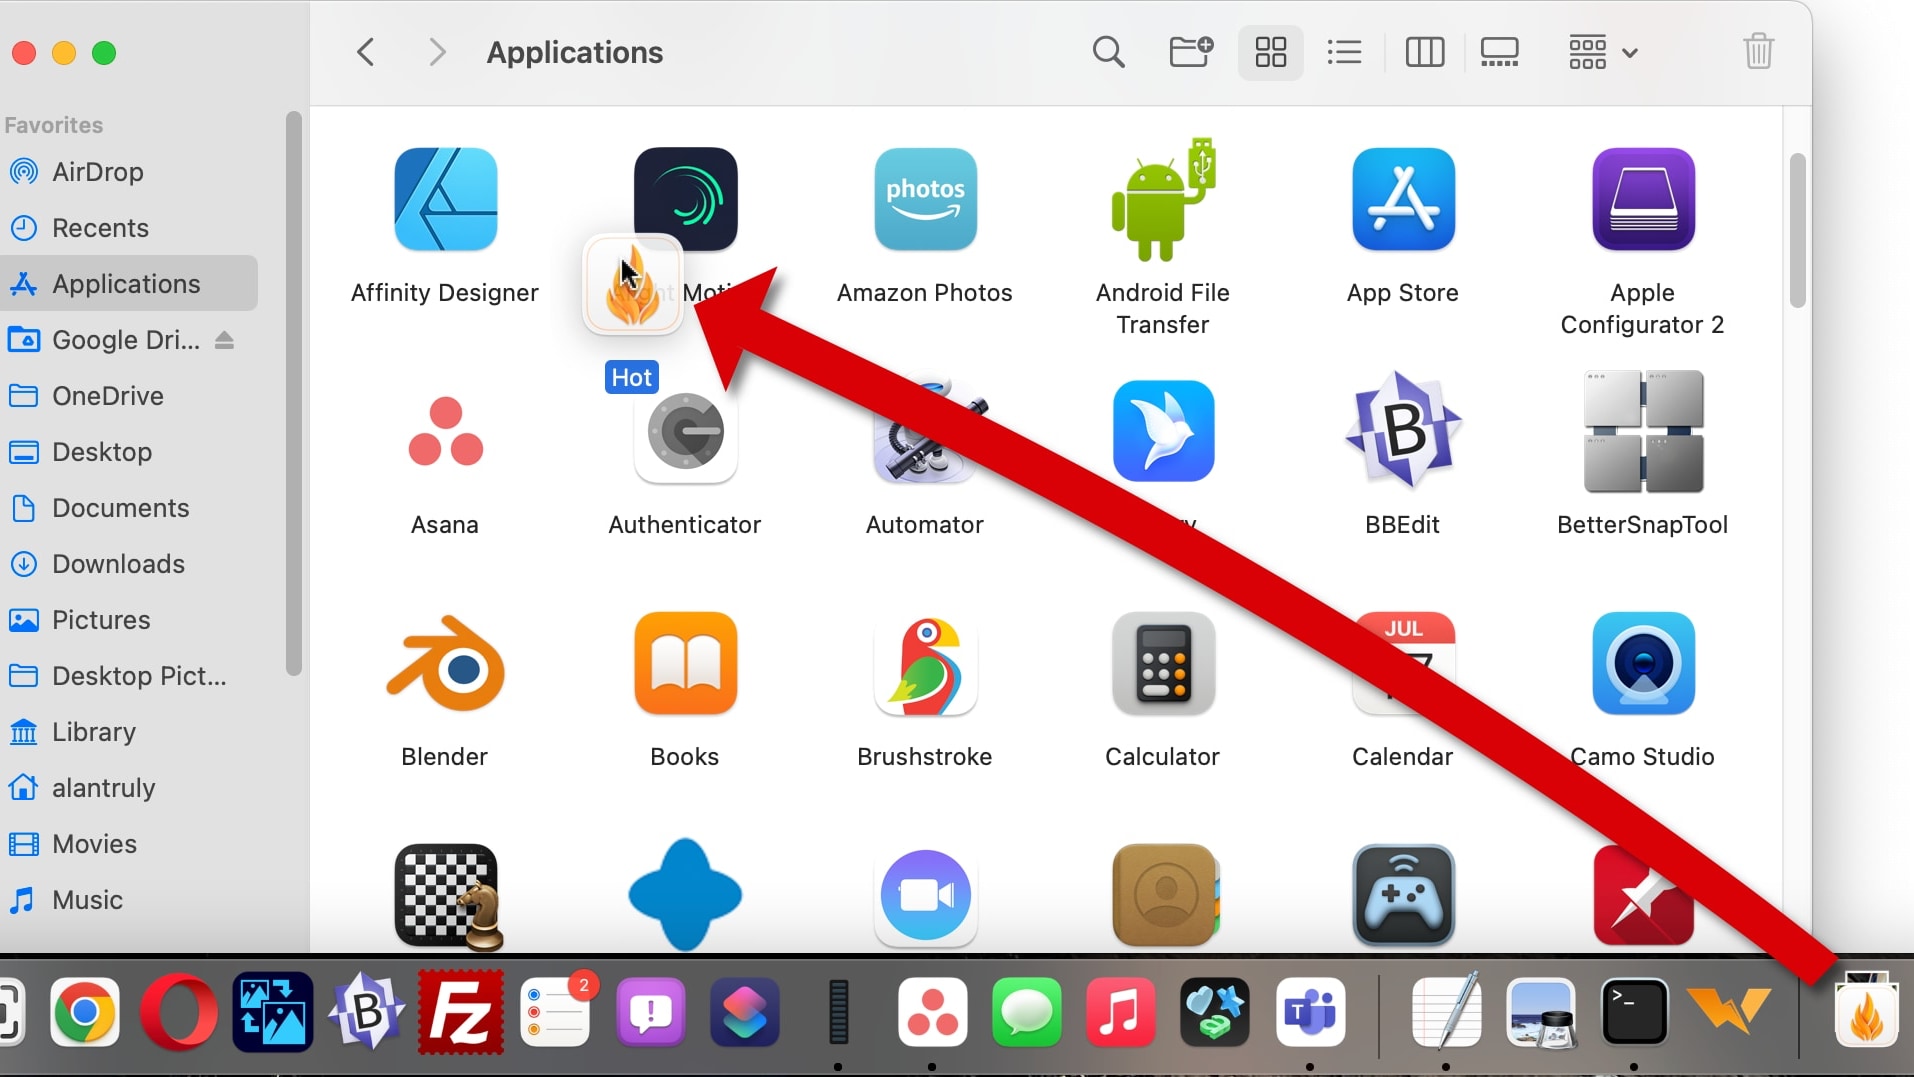 Drag the hot app to the Applications folder